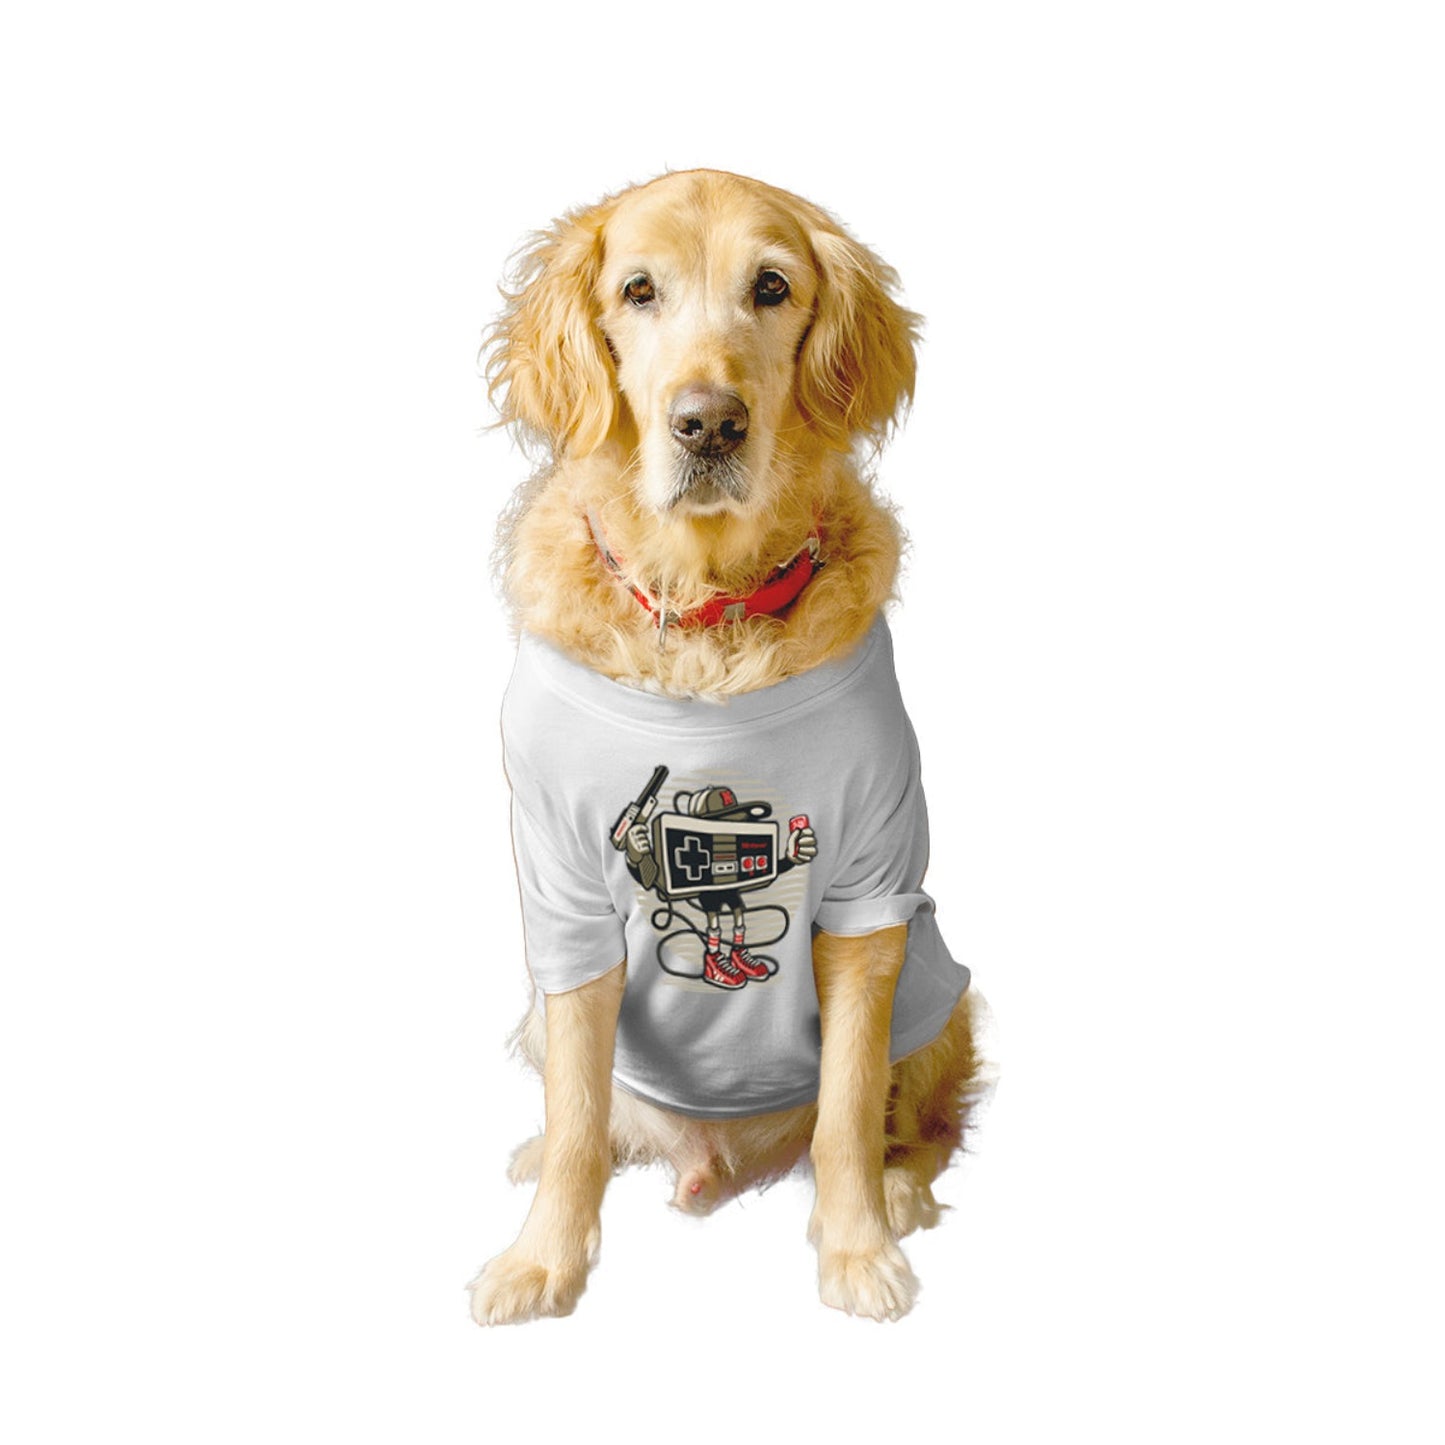 Ruse XX-Small (Chihuahuas, Papillons) / White Ruse Basic Crew Neck "Let's Play" Printed Half Sleeves Dog Tee